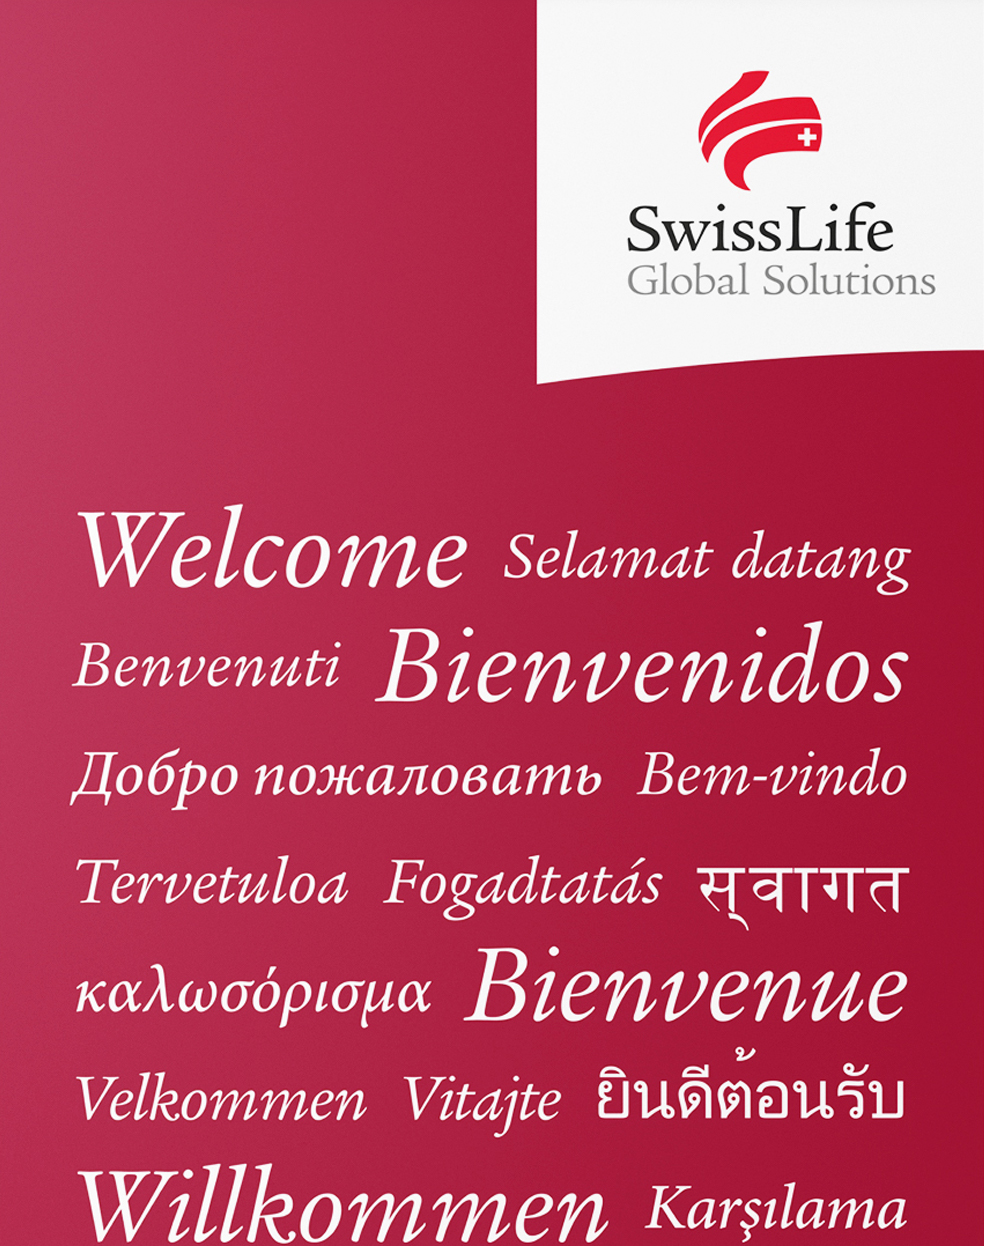 Swiss Life Global Solutions – Roll-Up Display